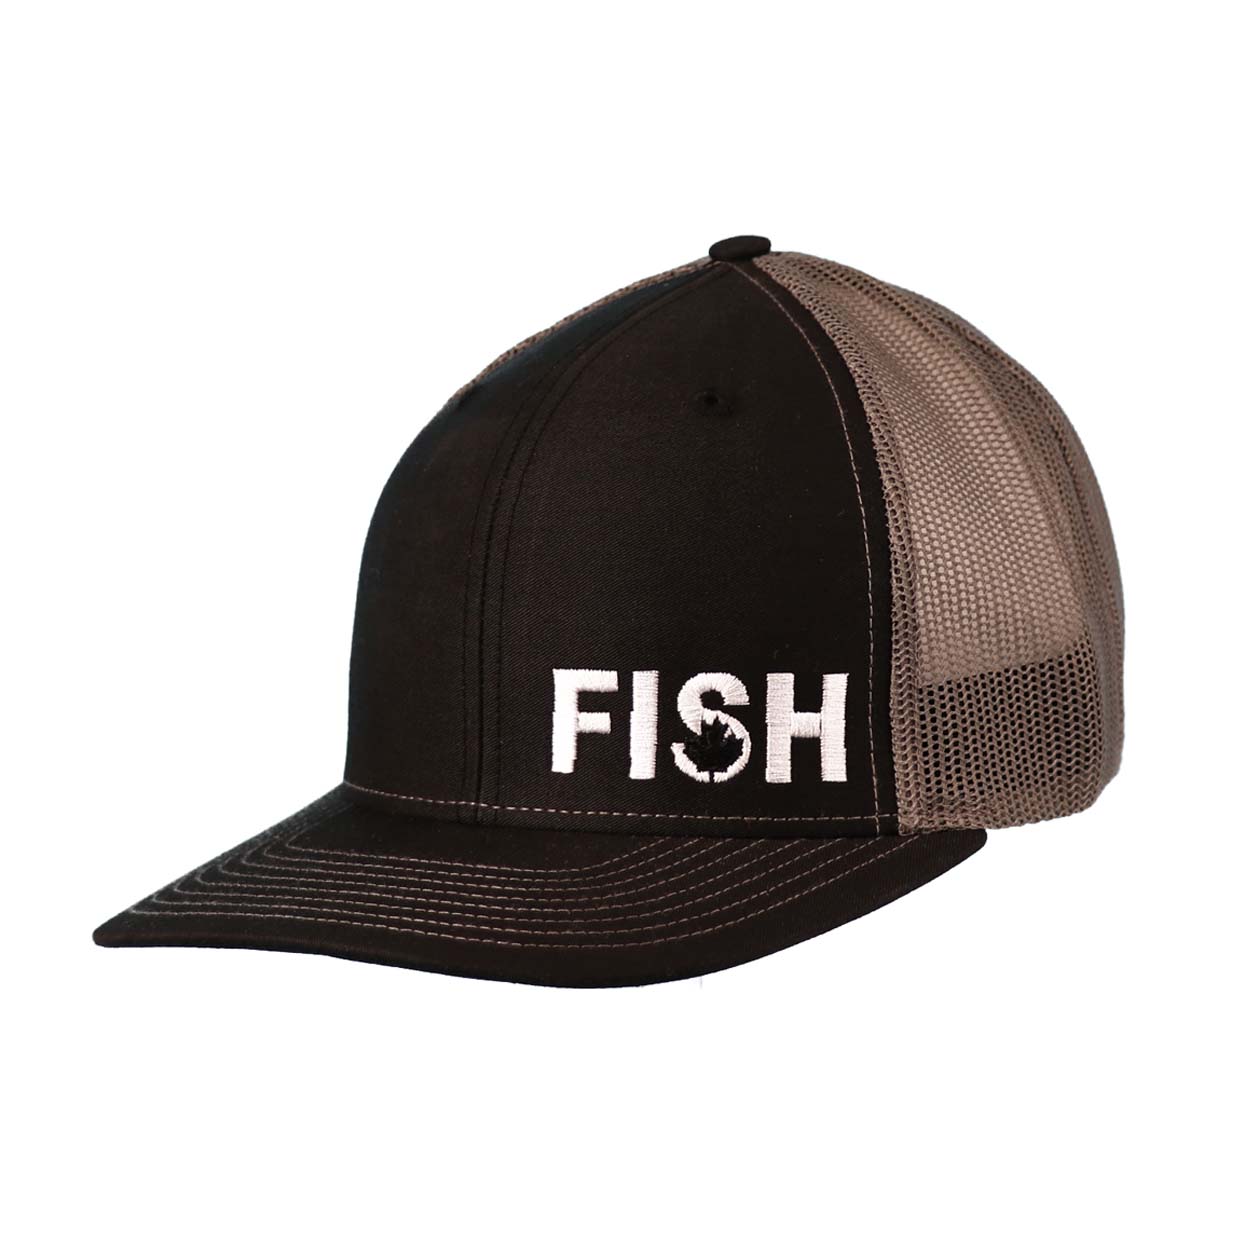 Fish Canada Night Out Embroidered Snapback Trucker hat Black/White